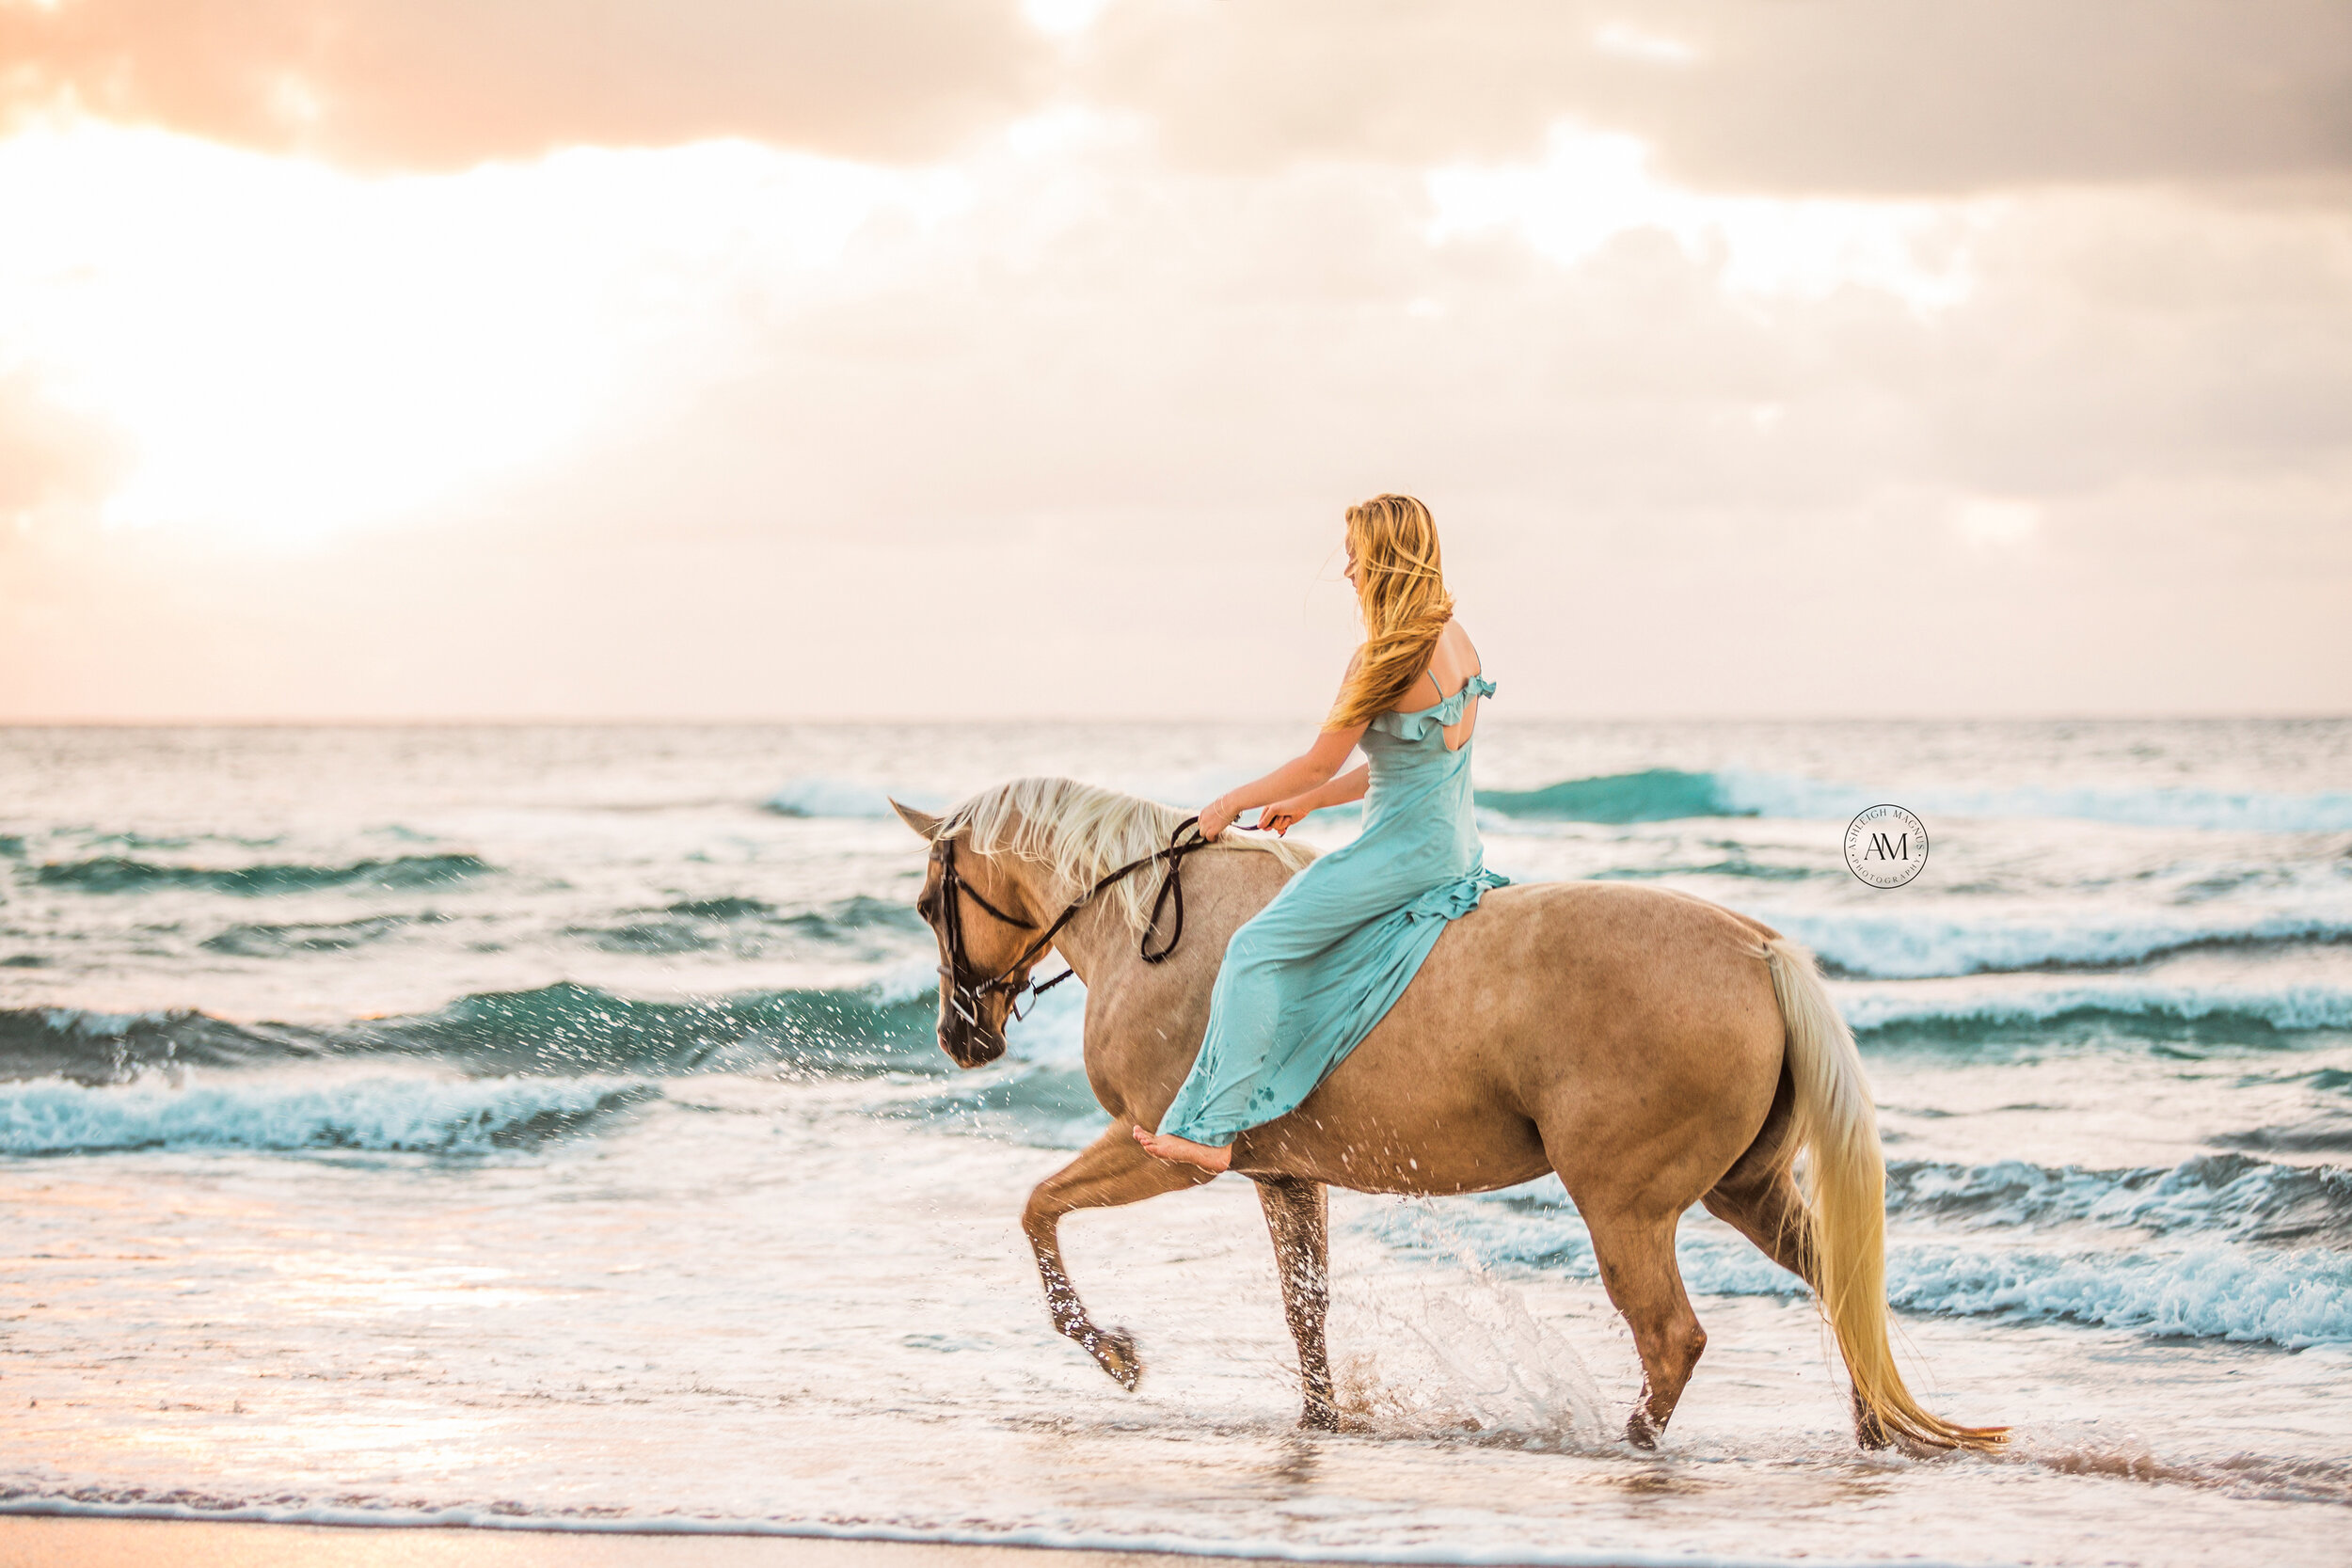 Girl riding on her horse in the ocean with a dress